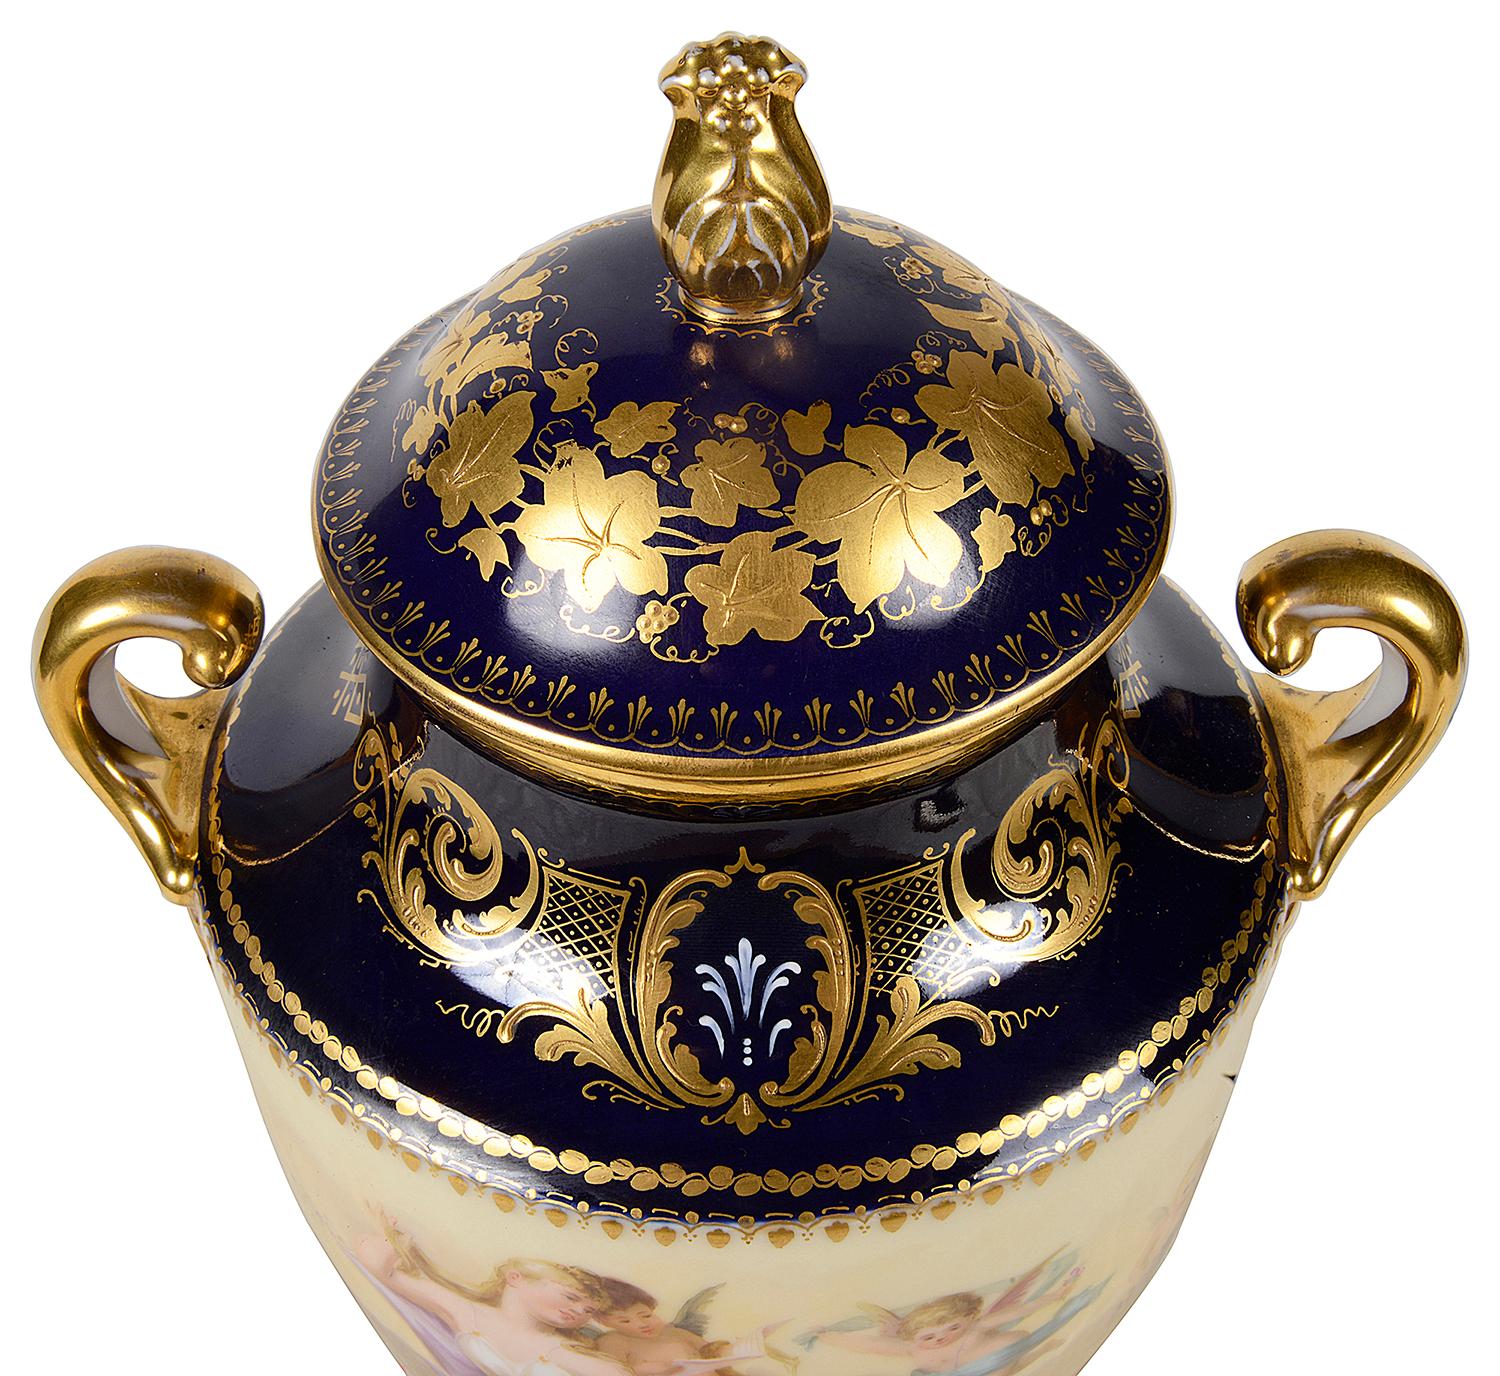 A fine quality late 19th Century Vienna porcelain lidded two handle vase, having a cobalt blue ground, gilded scrolling decoration, a cream coloured central band with a classical scene of a reclining maiden with cherubs playing. The vase standing on